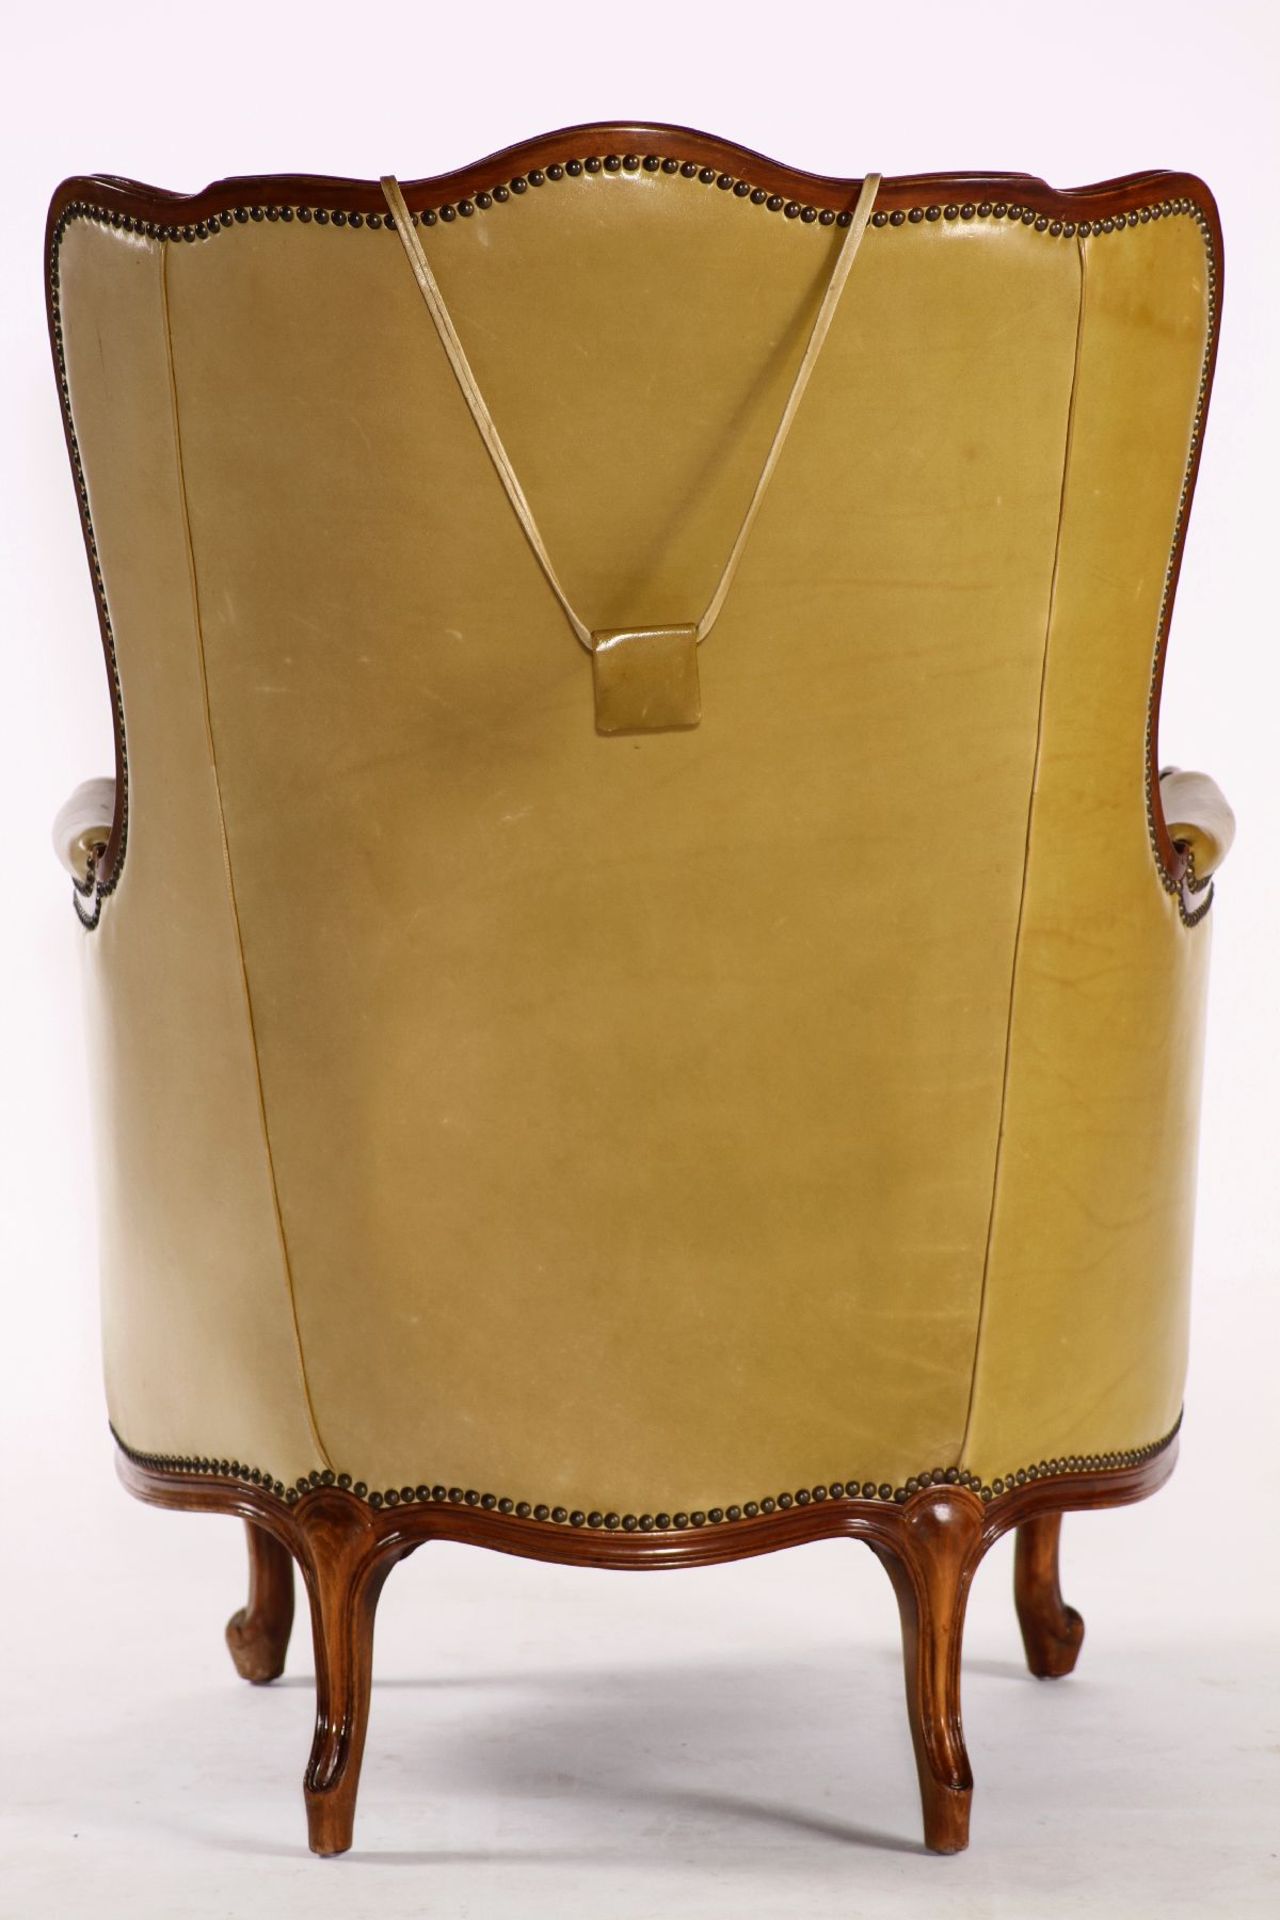 Wingback armchair, after engl. prototype from 1870/80, solid walnut frame, yellow-green or olive - Image 4 of 4